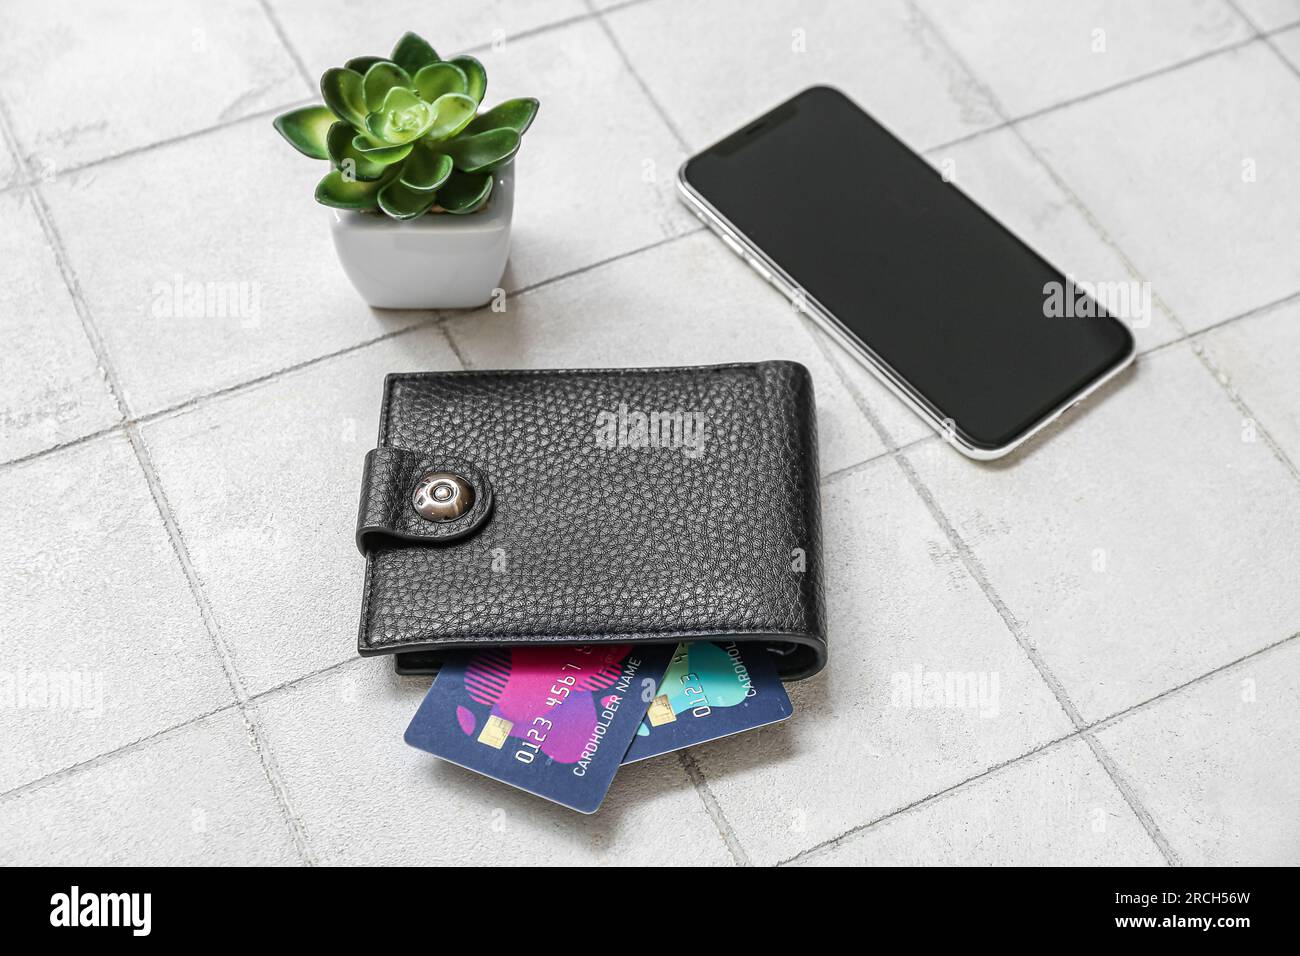 Leather wallet with credit cards, mobile phone and houseplant on white tile background Stock Photo